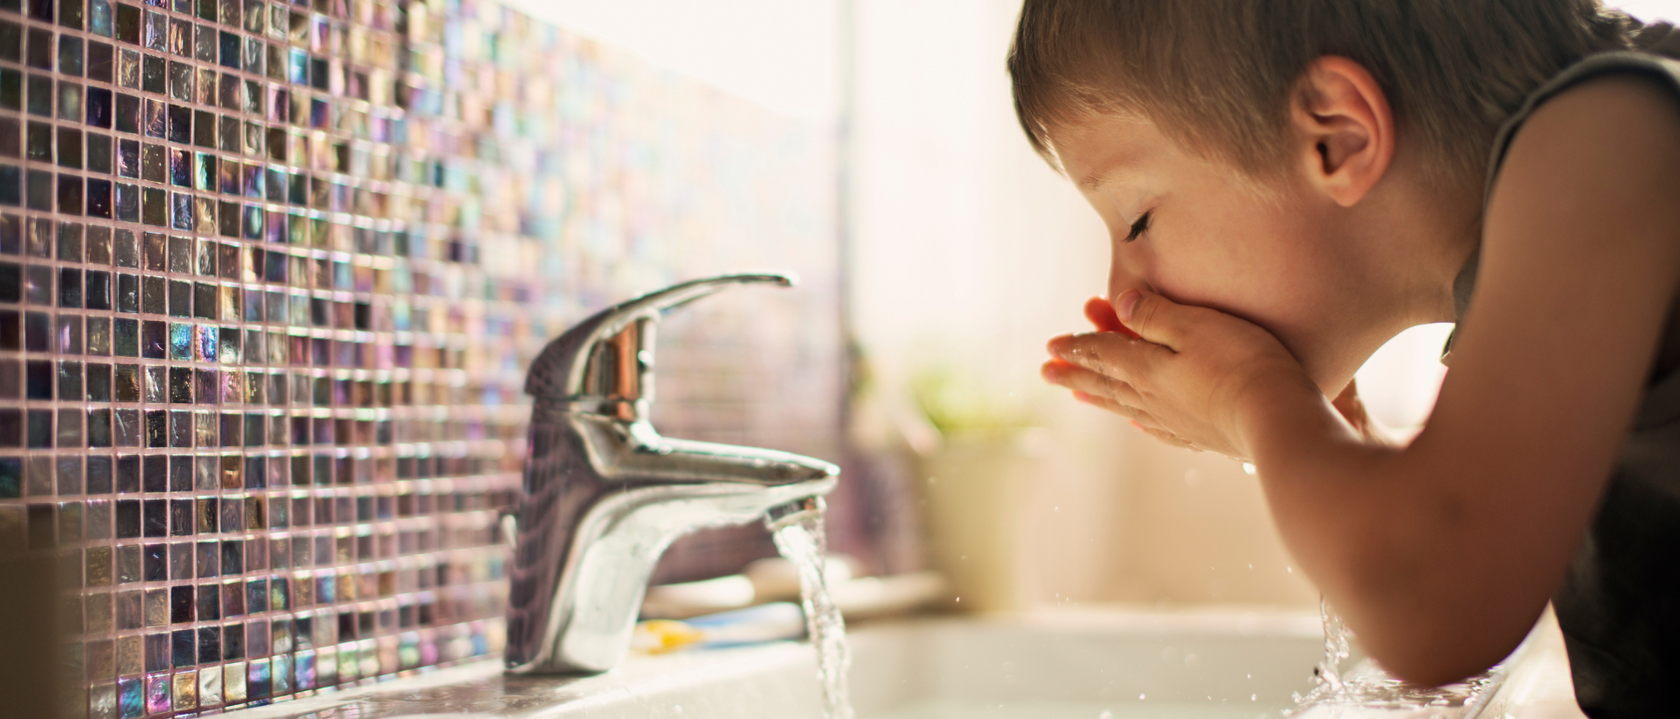 Lead in Drinking Water - A Wake-Up Call for Parents